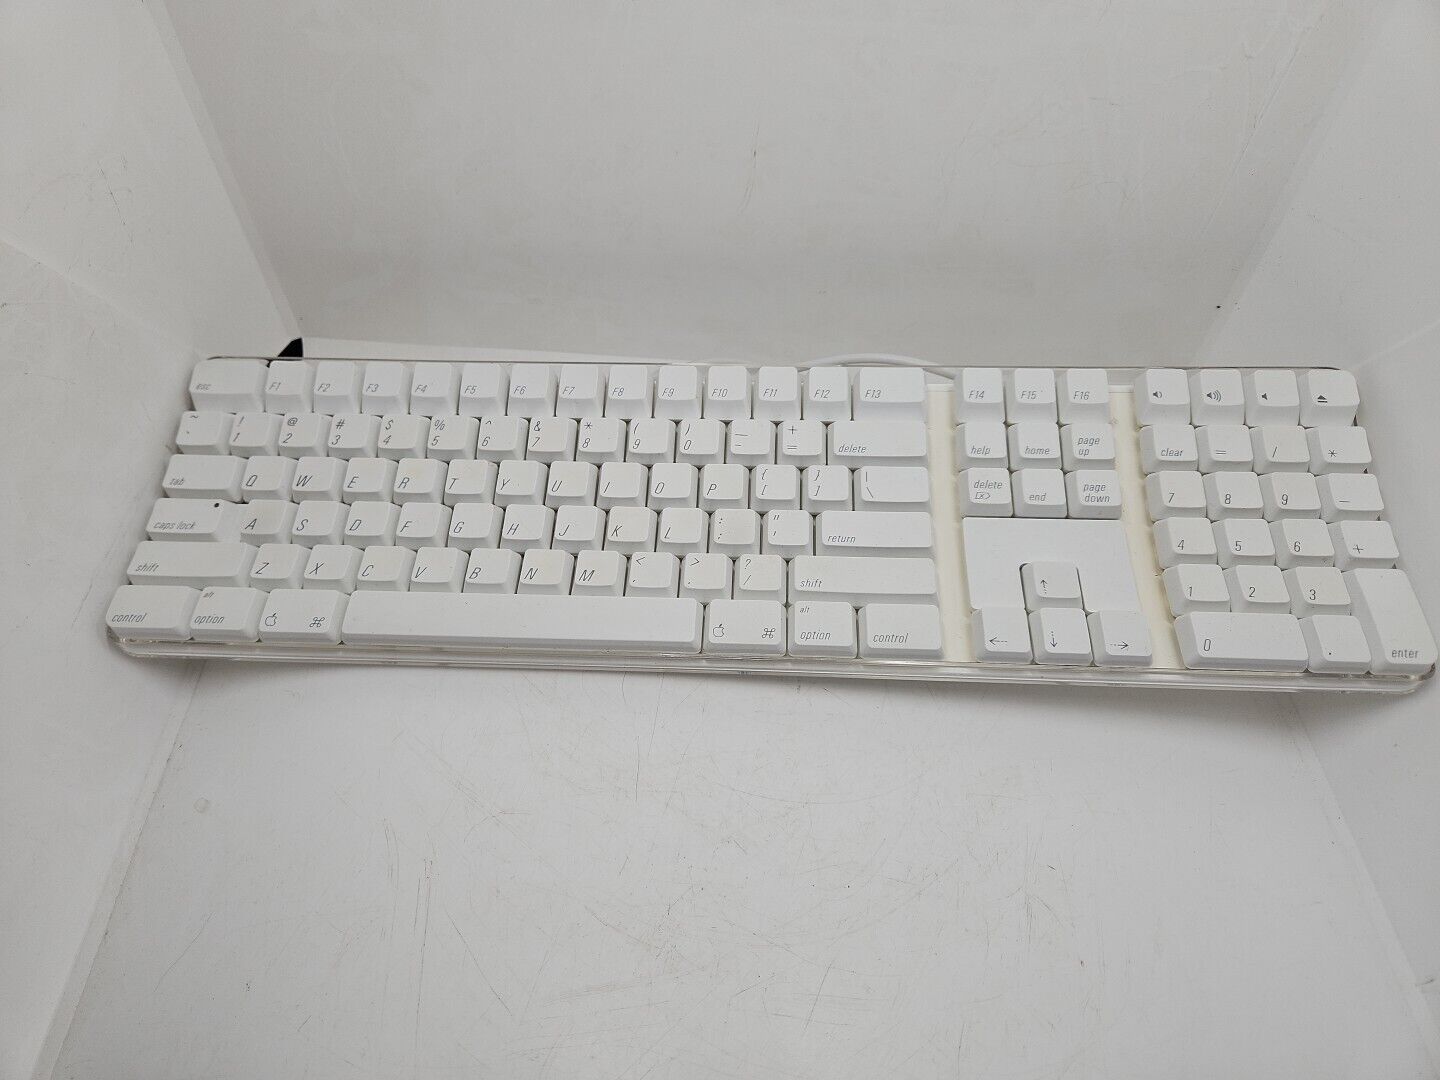 Genuine Apple Wired White Keyboard A1048 EMC1944 USA Layout Tested BOX MANUALS